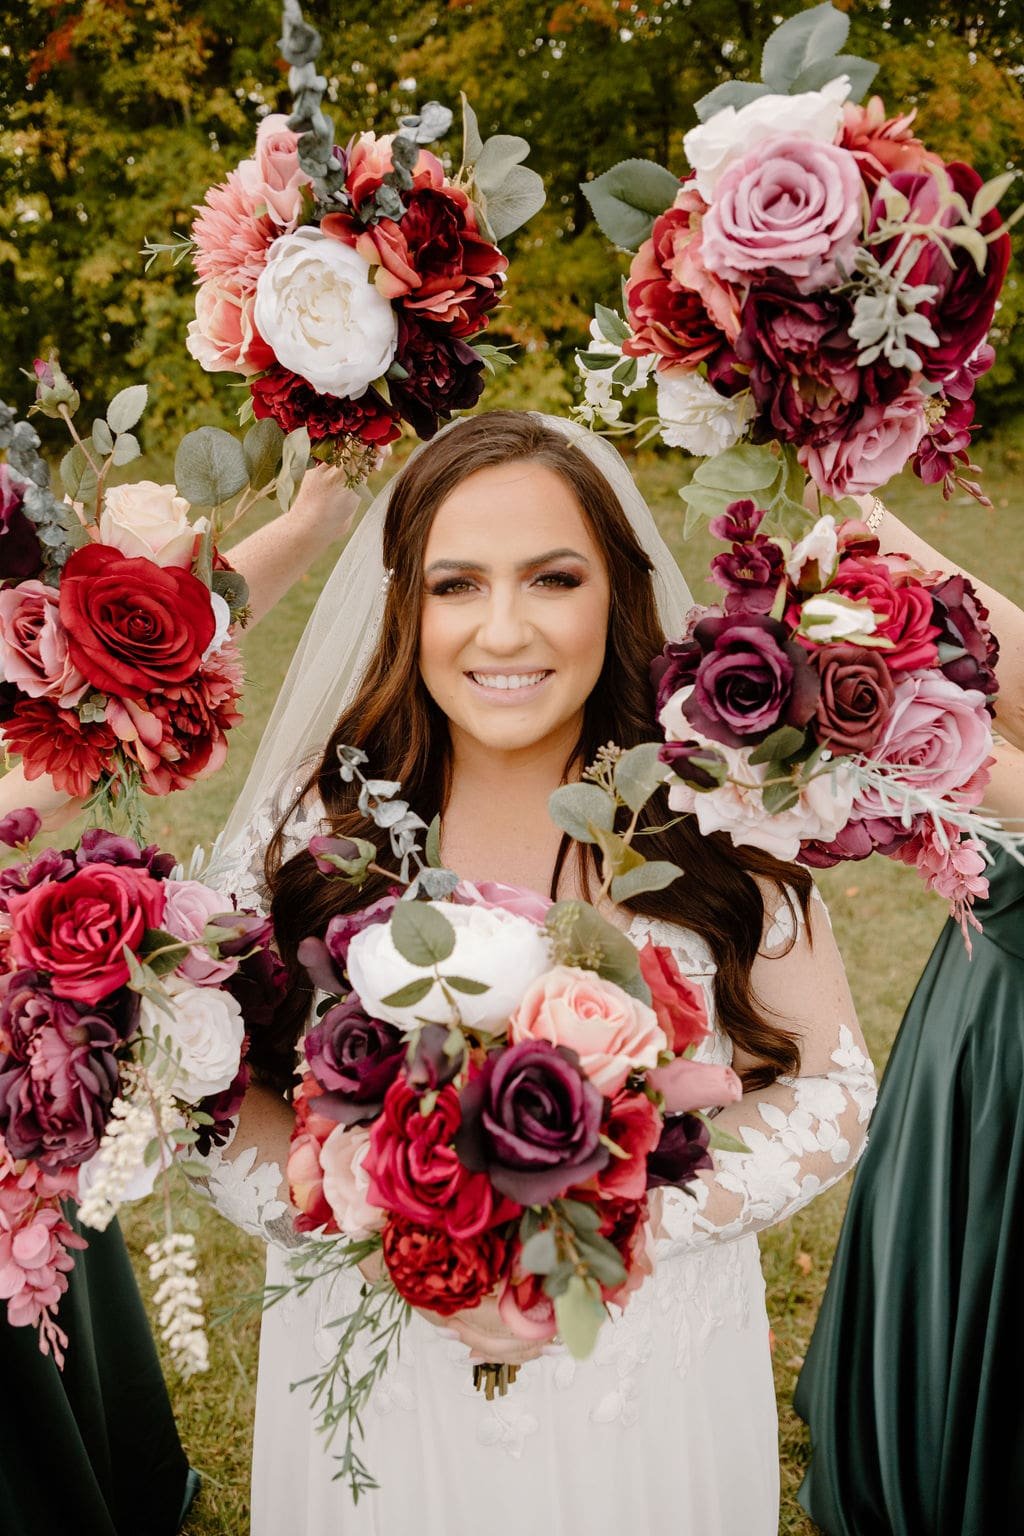 Bride with flowers around her face